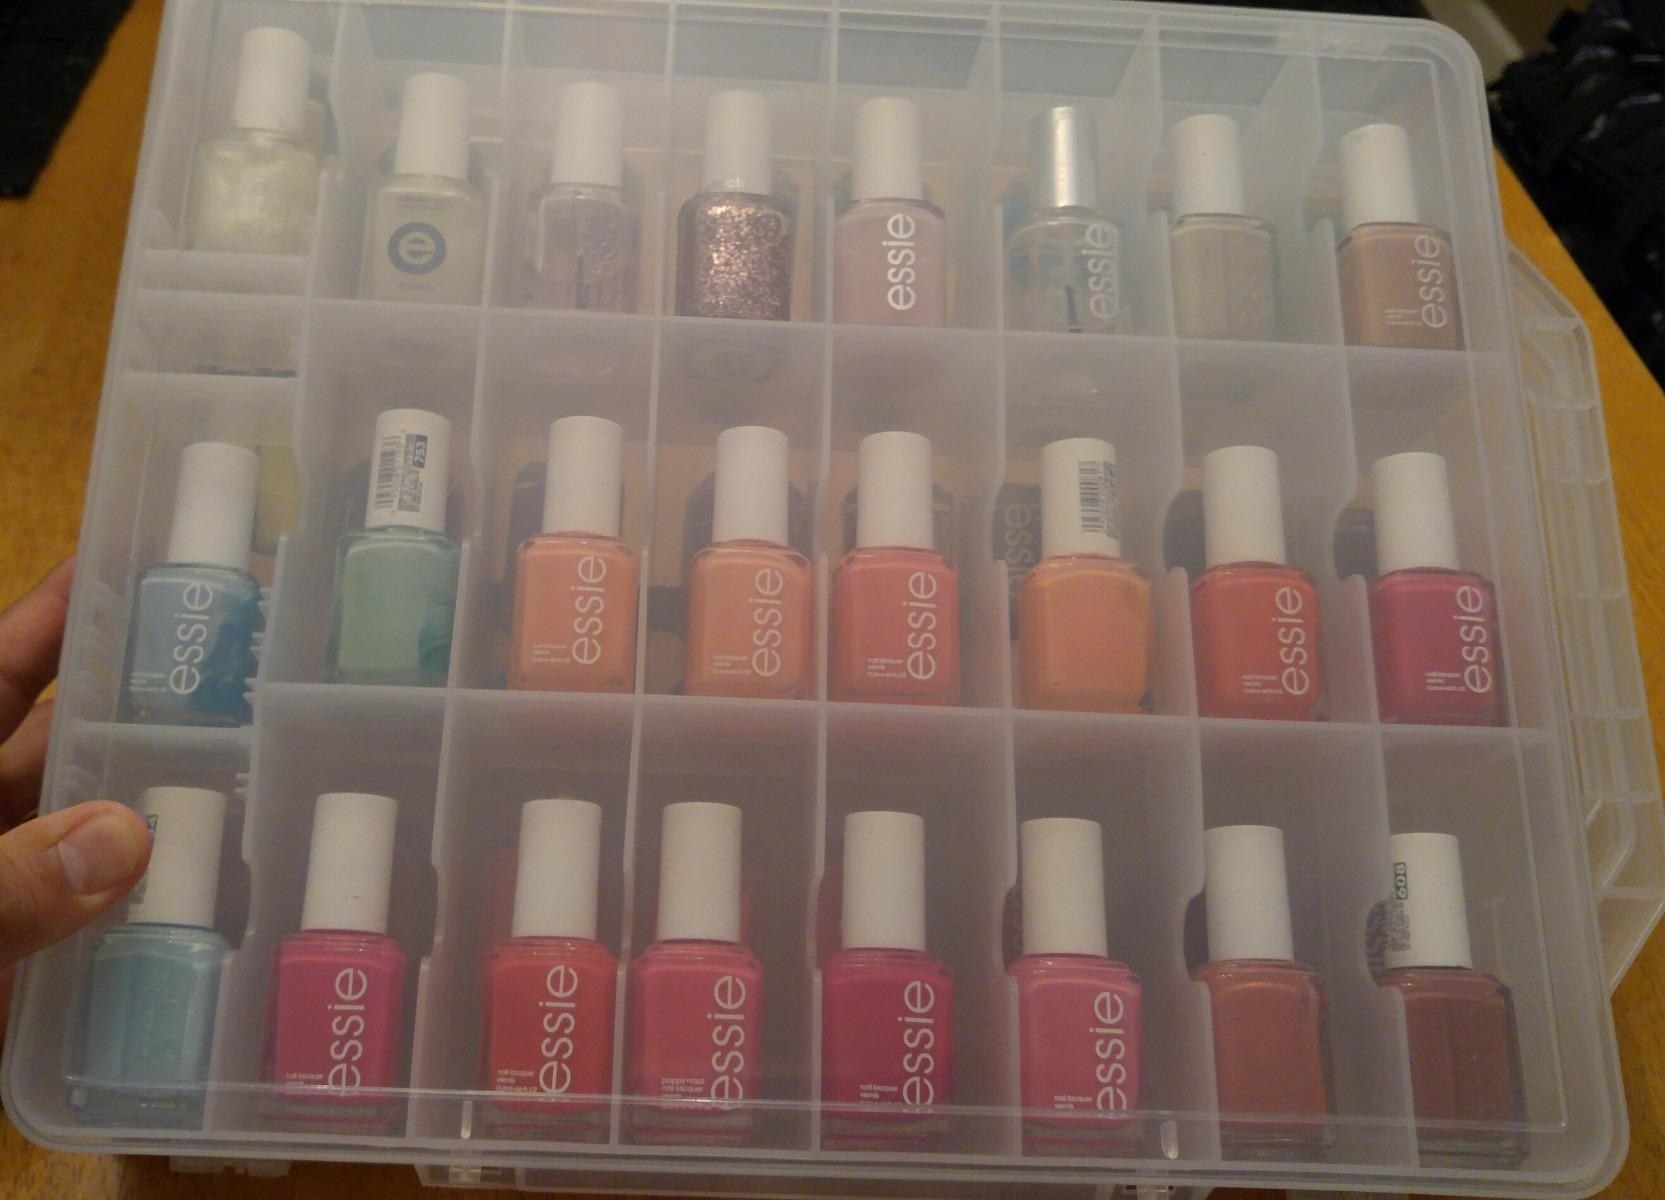 Reviewer photo of the bin filled with a rainbow of assorted nail polish bottles